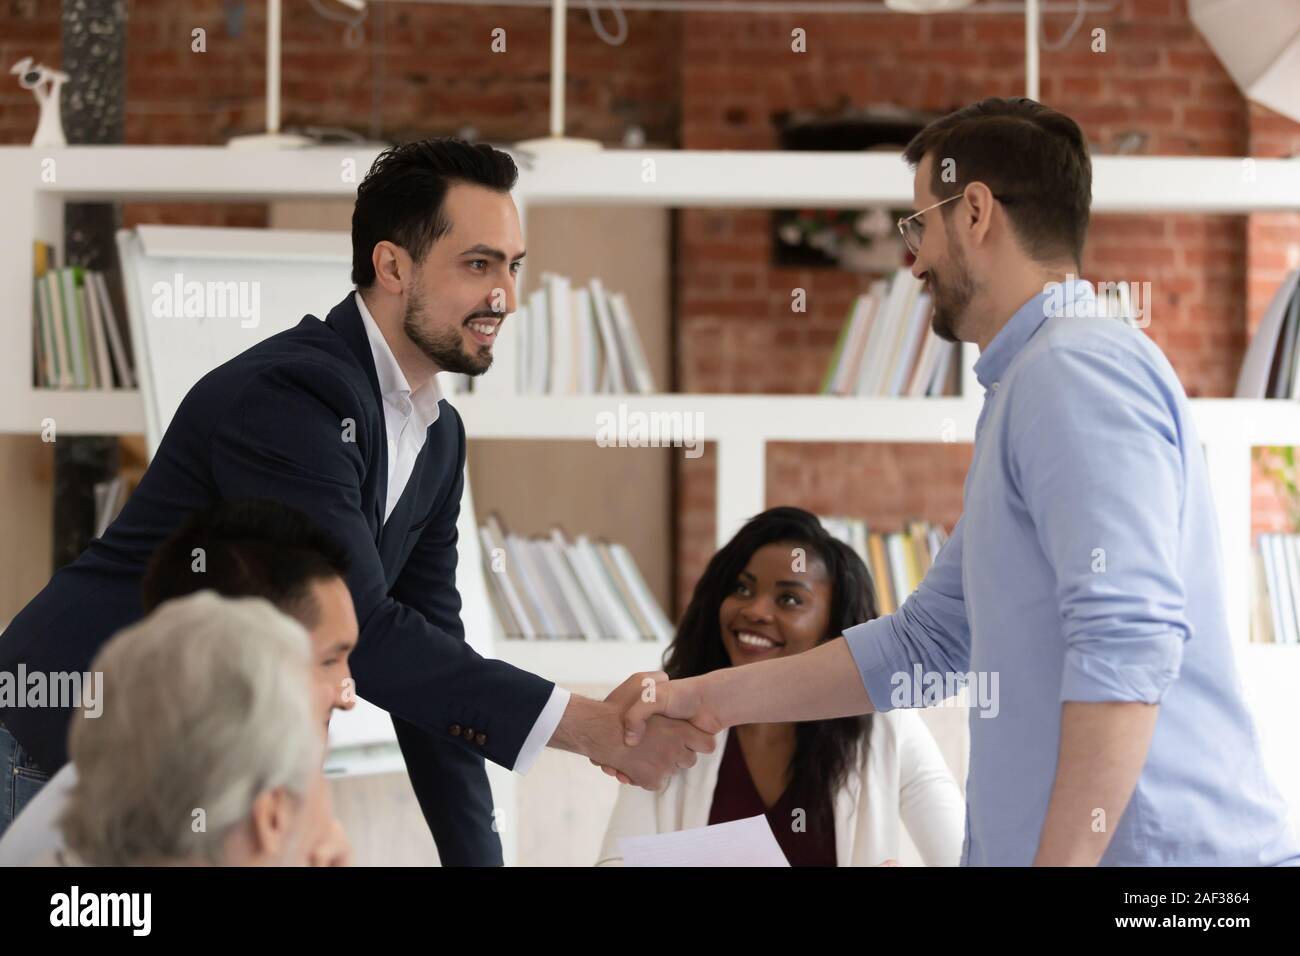 Middle east appearance and caucasian businessmen shake hands during meeting Stock Photo